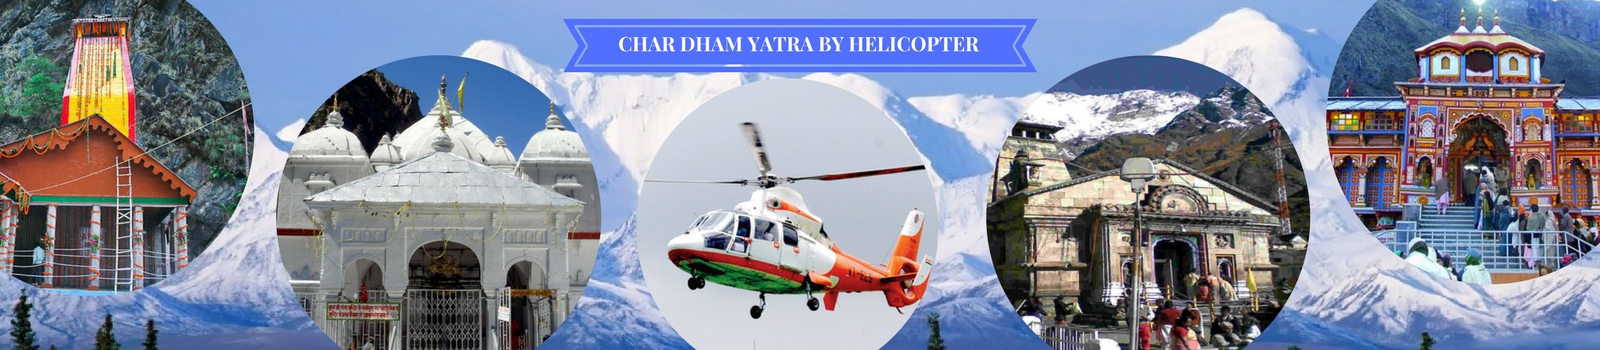 Chardham Yatra 2022 by helicopter